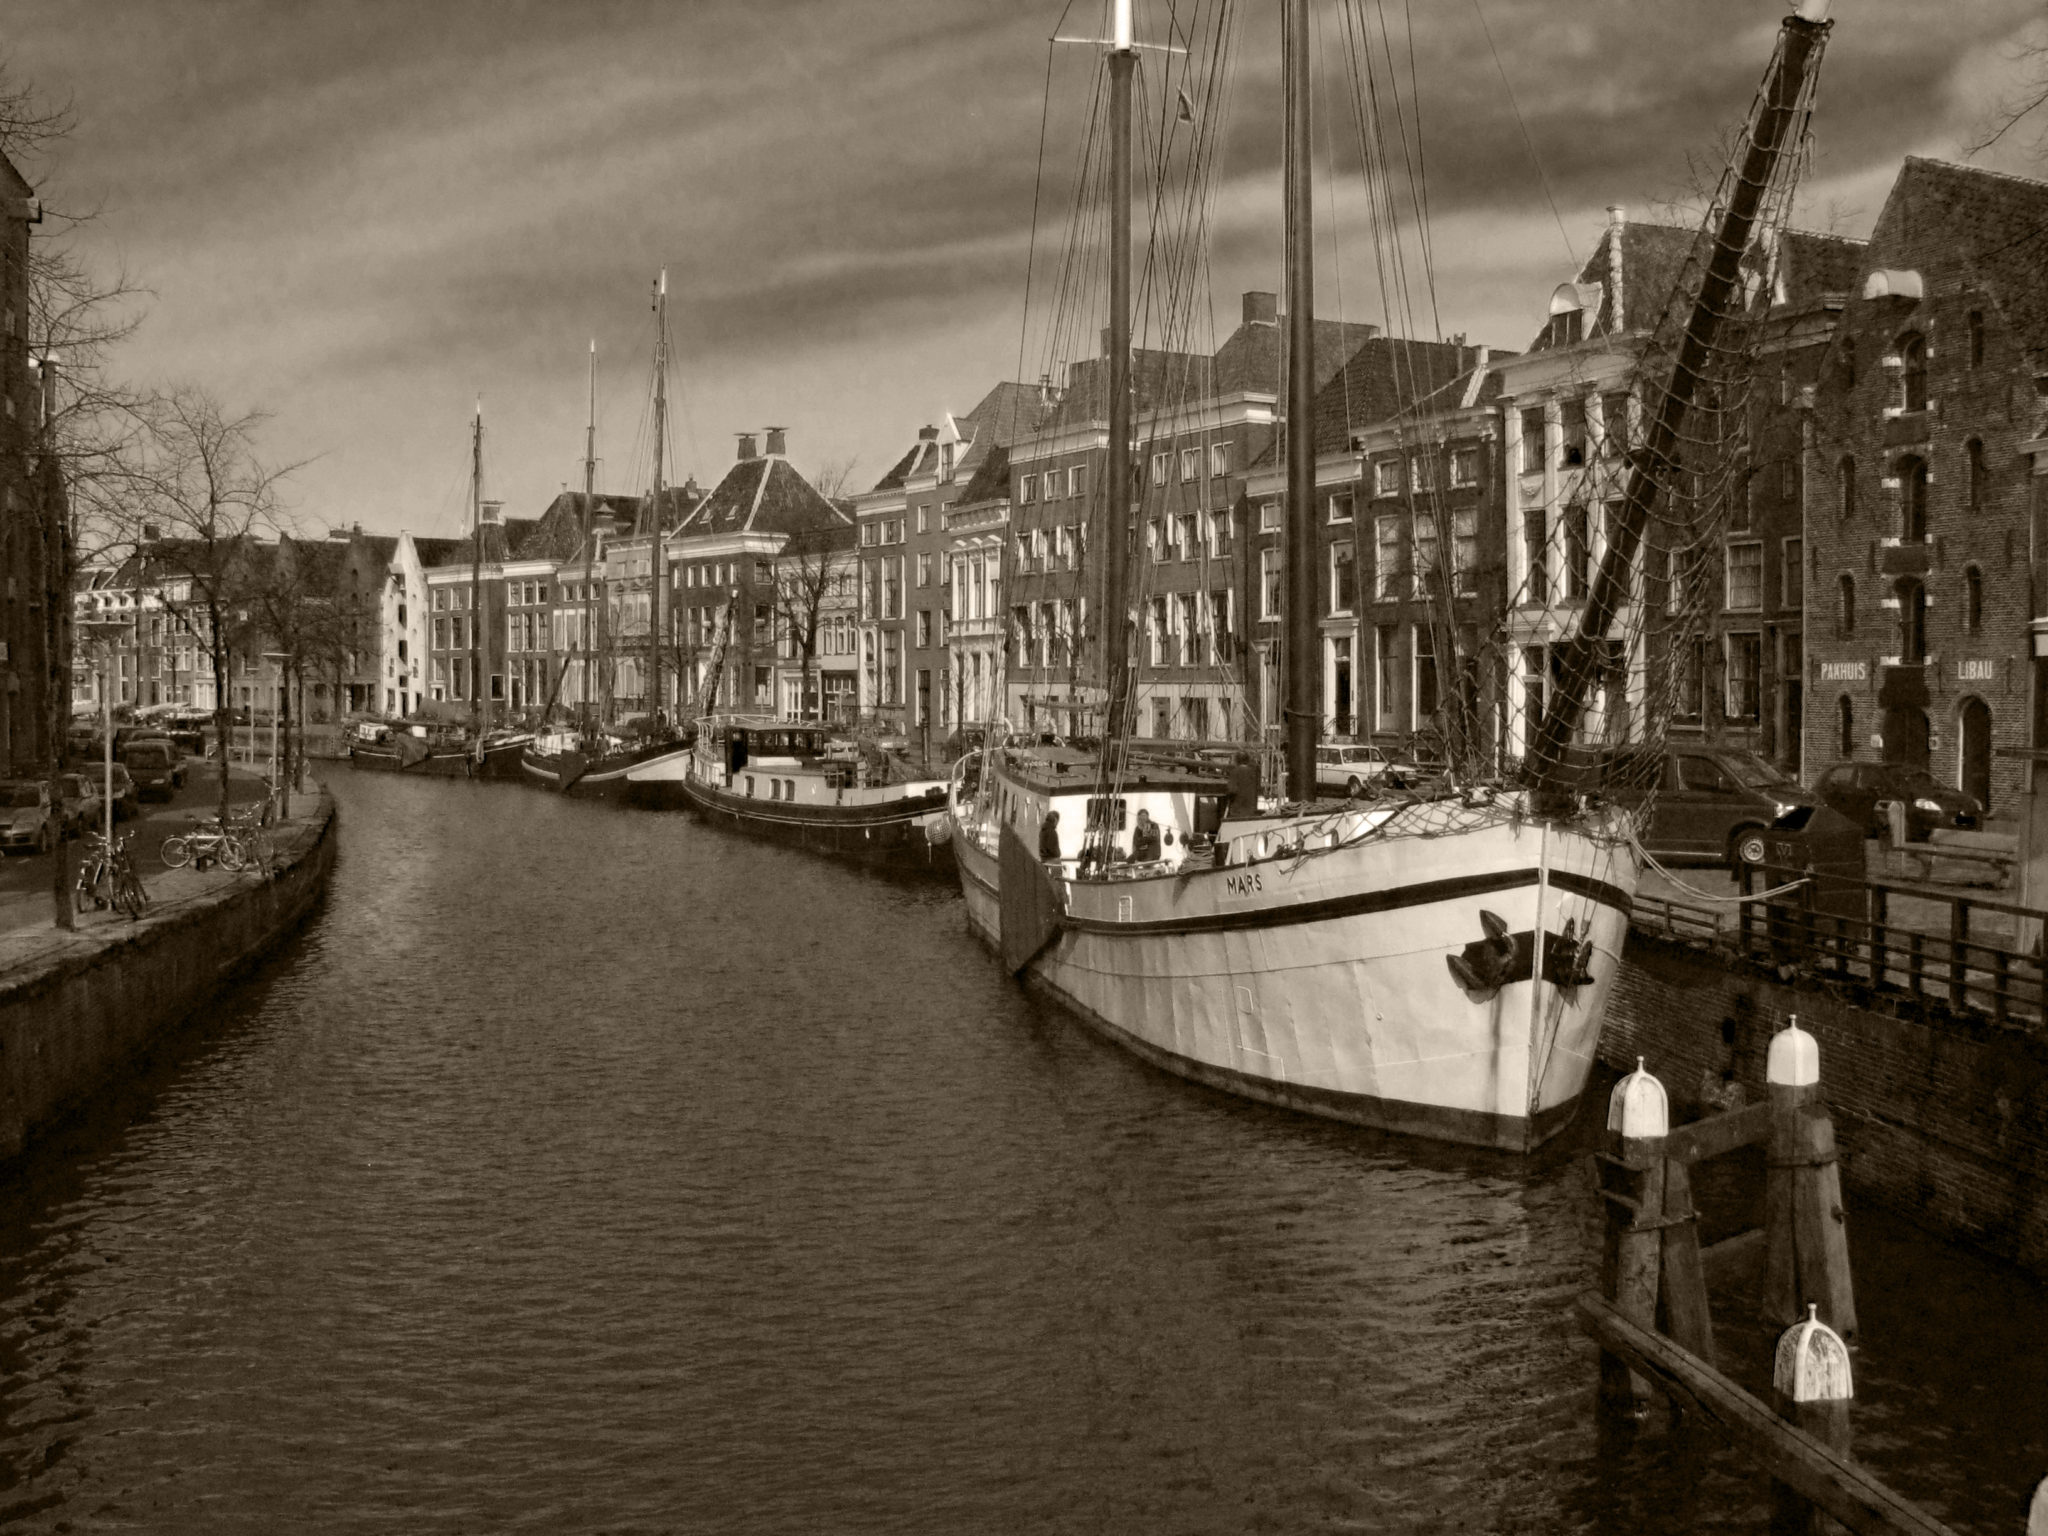 Sailboats in Netherlands by Skitter Photo from stocksnap.io